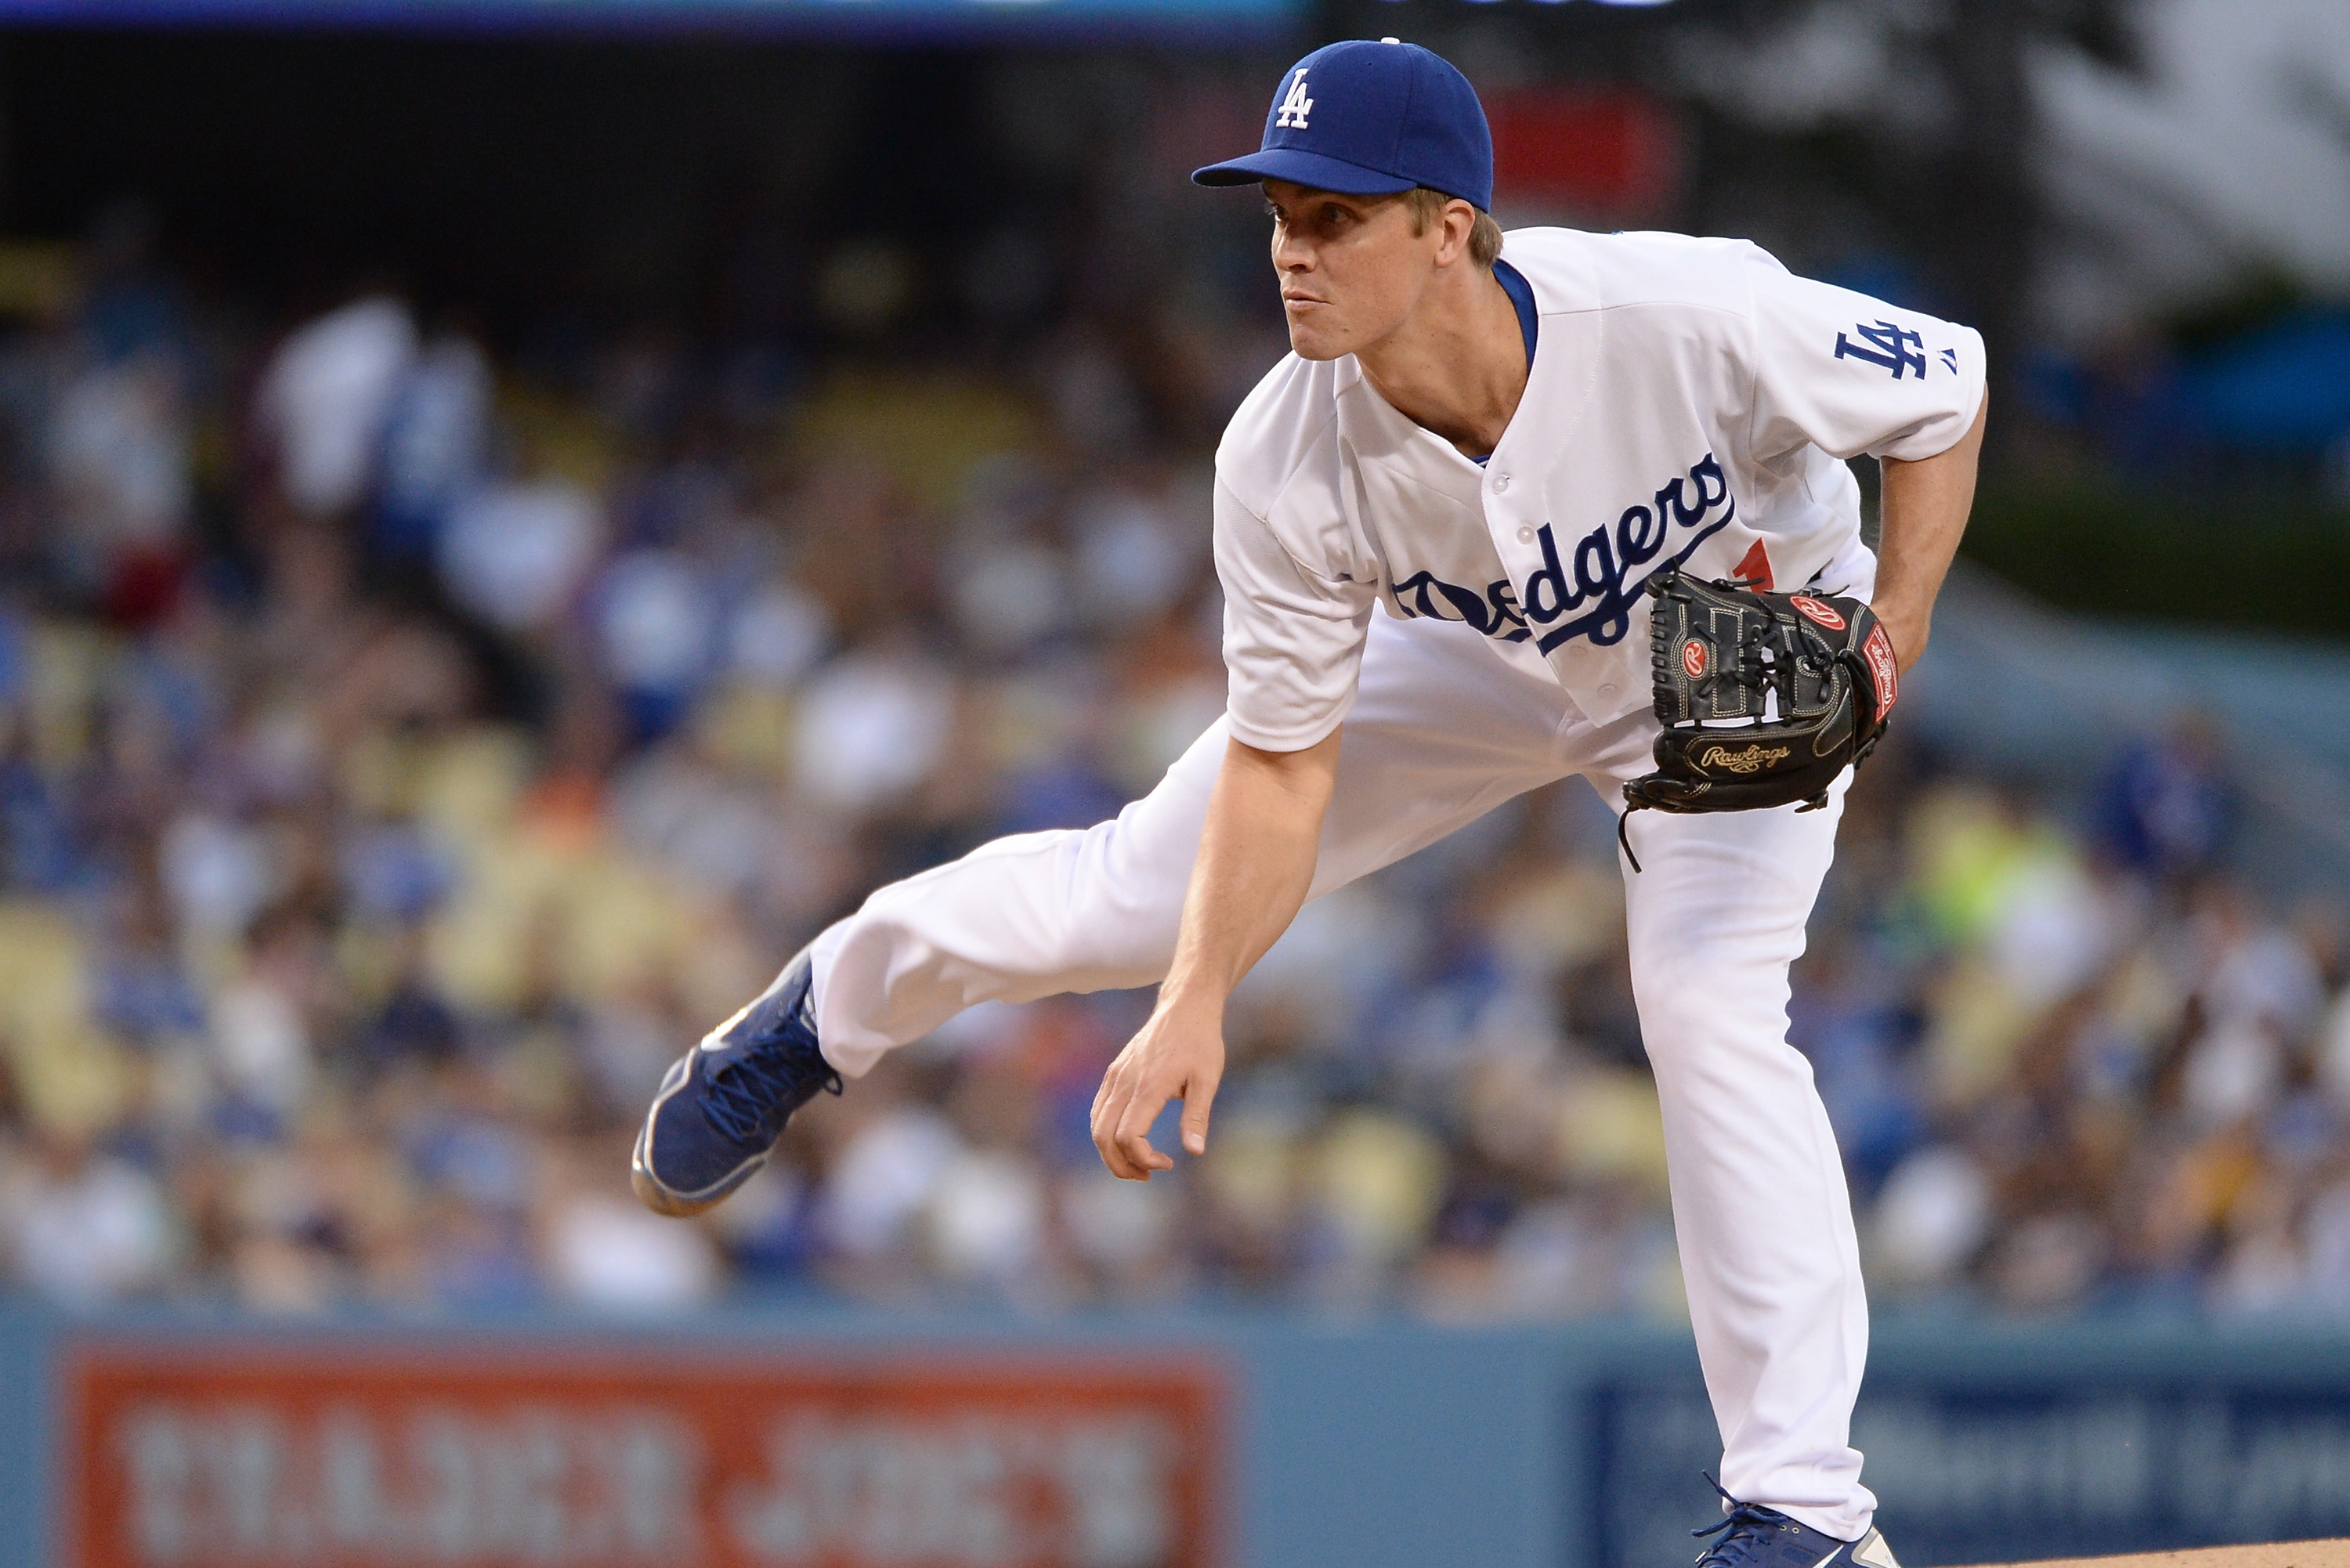 Zack Greinke's masterful season for the Los Angeles Dodgers is the